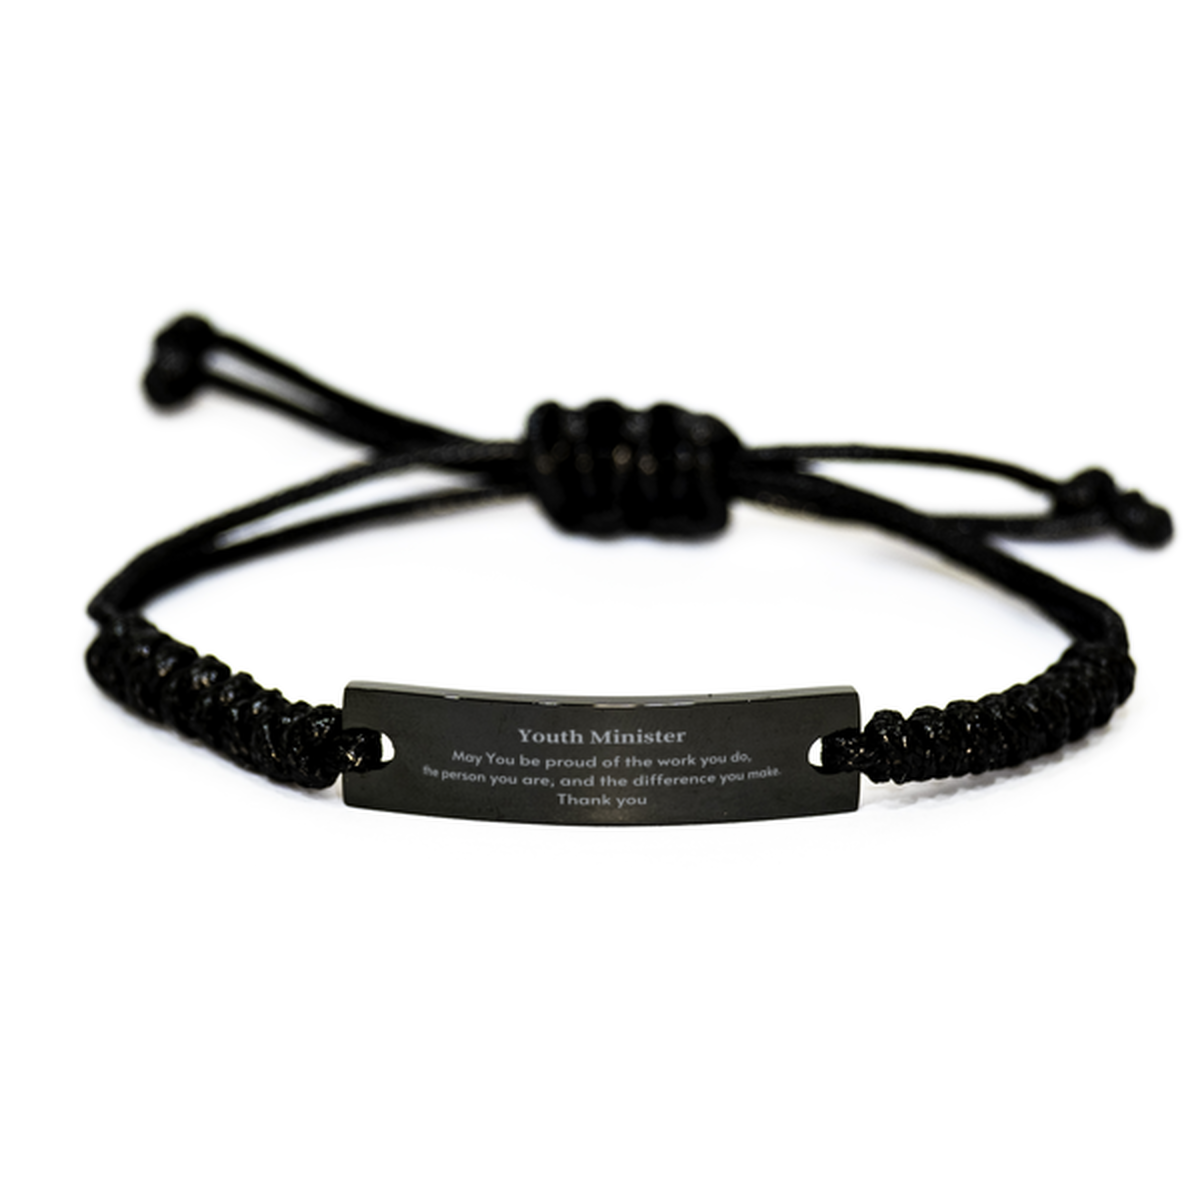 Heartwarming Black Rope Bracelet Retirement Coworkers Gifts for Youth Minister, Youth Minister May You be proud of the work you do, the person you are Gifts for Boss Men Women Friends